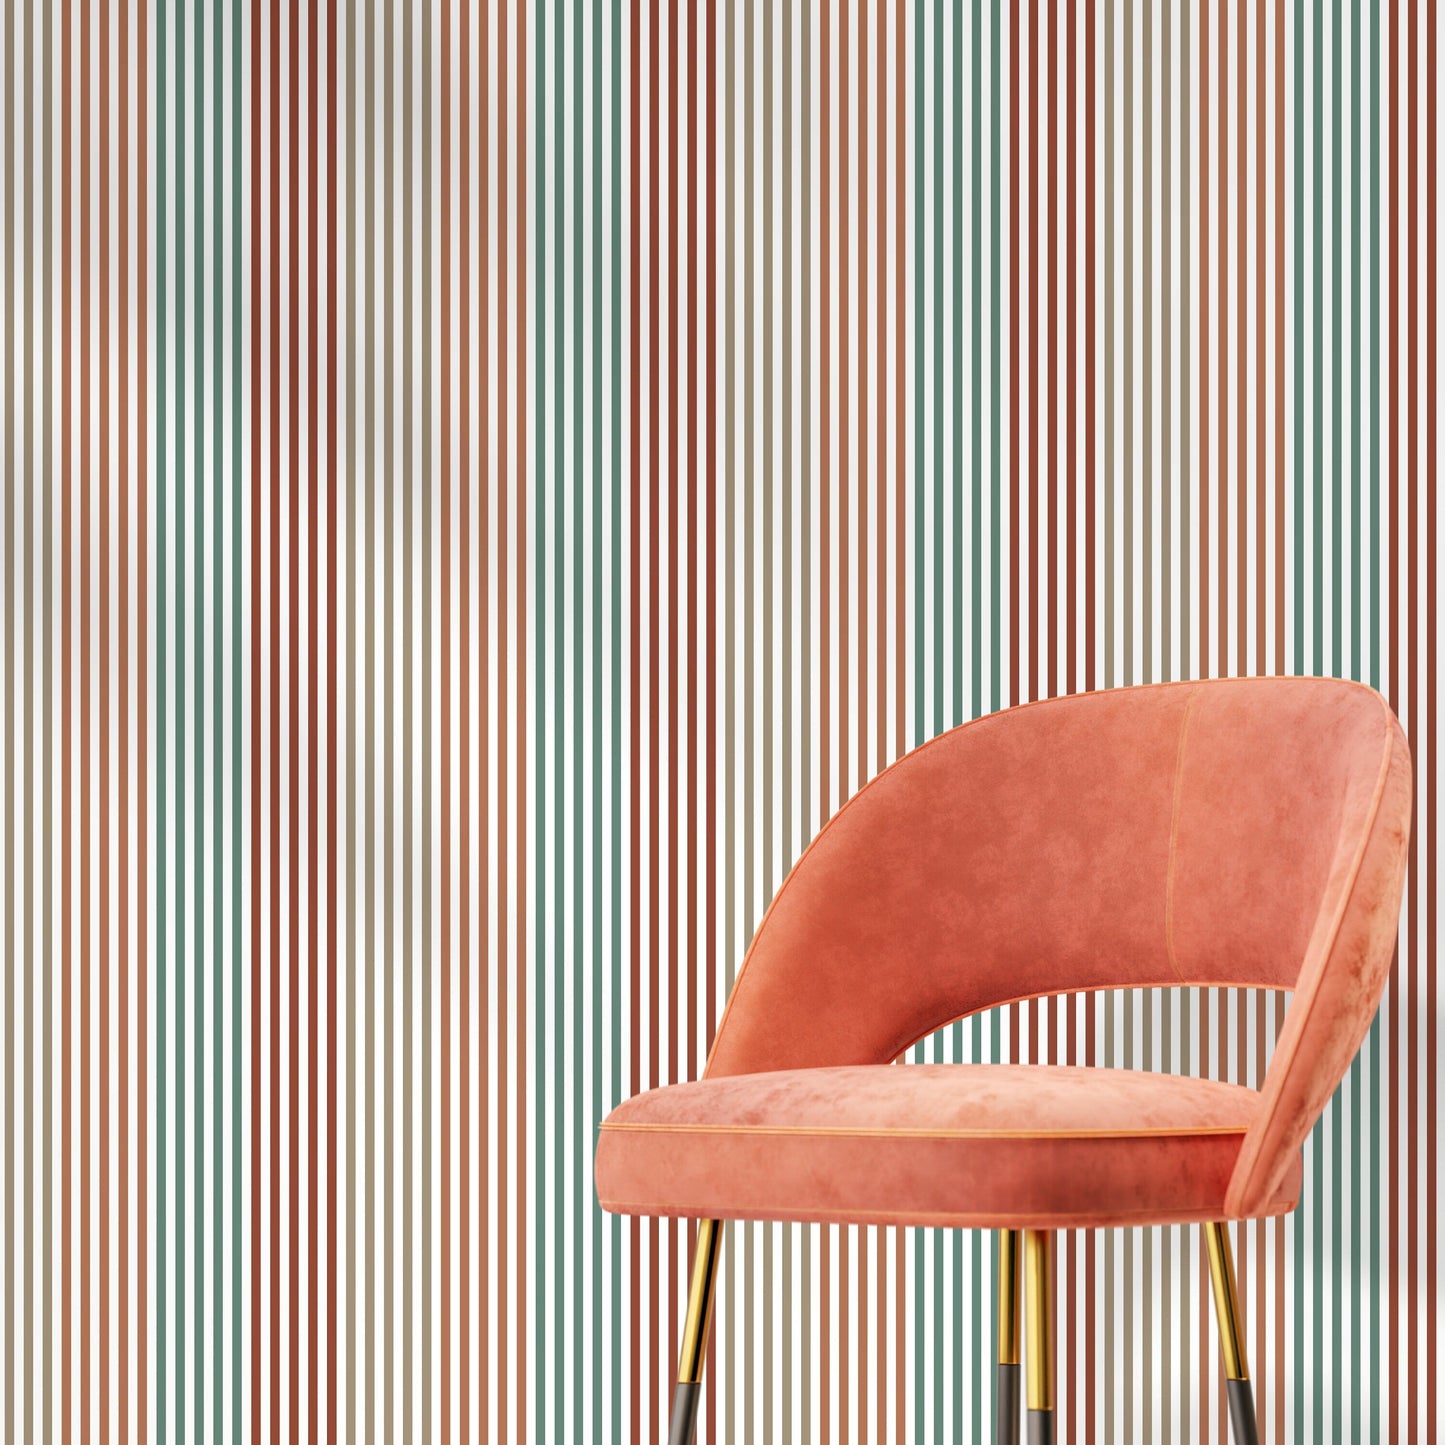 Modern Striped Wallpaper Geometric Wallpaper Peel and Stick and Traditional Wallpaper - D754